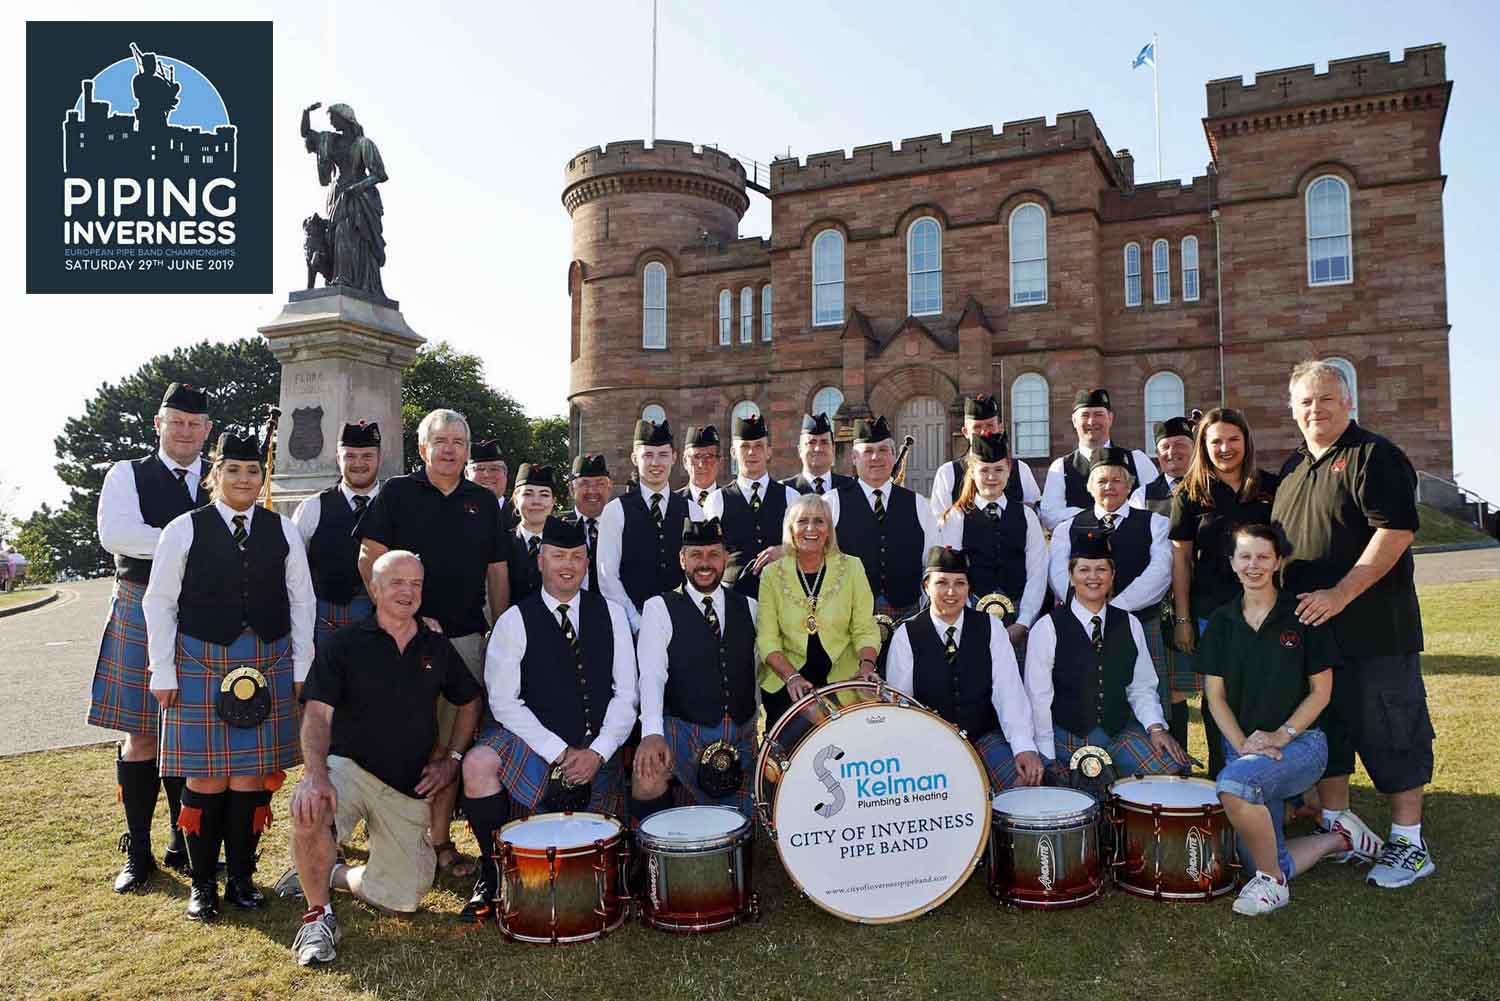 Promoters pitching European Championships as “Piping Inverness”